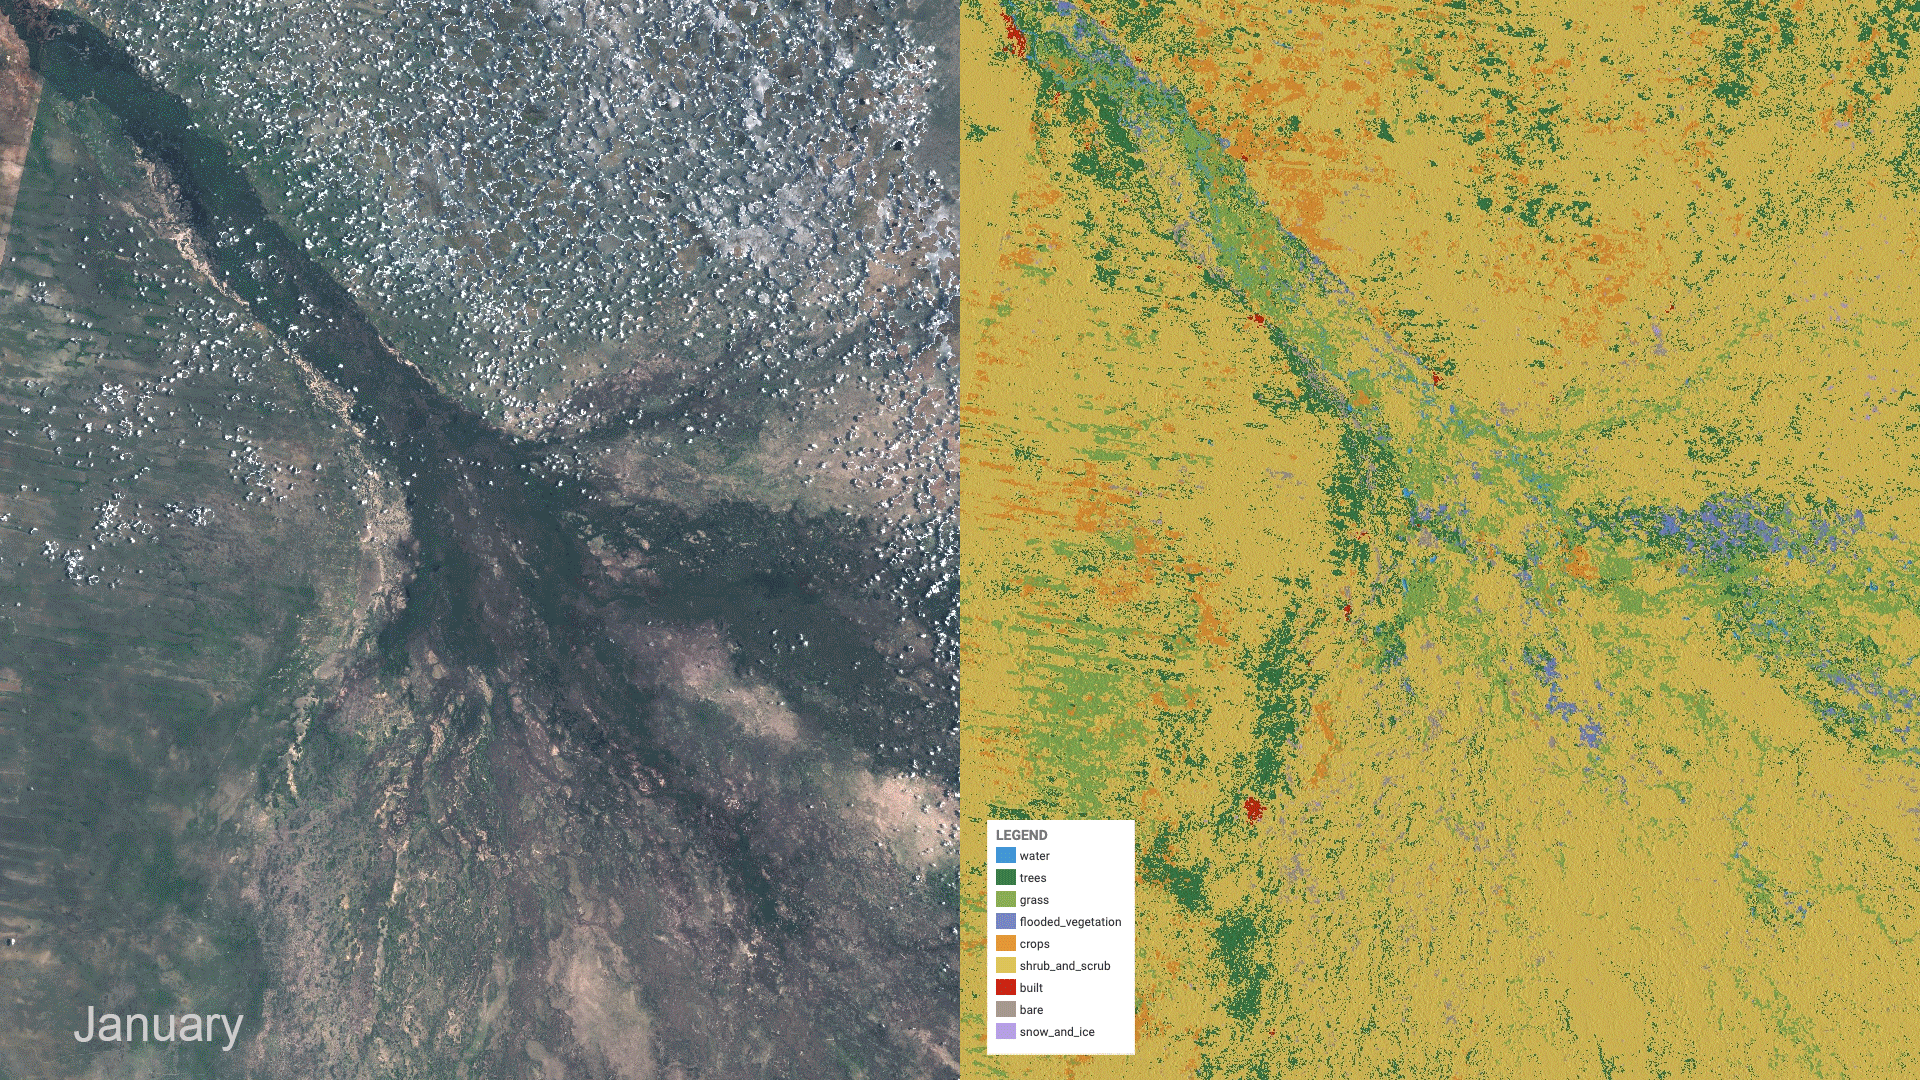 A gif shows satellite imagery and Dynamic World imagery of the Okavango Delta in Botswana with increasing green and blue coloring to show changes in land cover as the delta floods in July and August and then dries from September to October